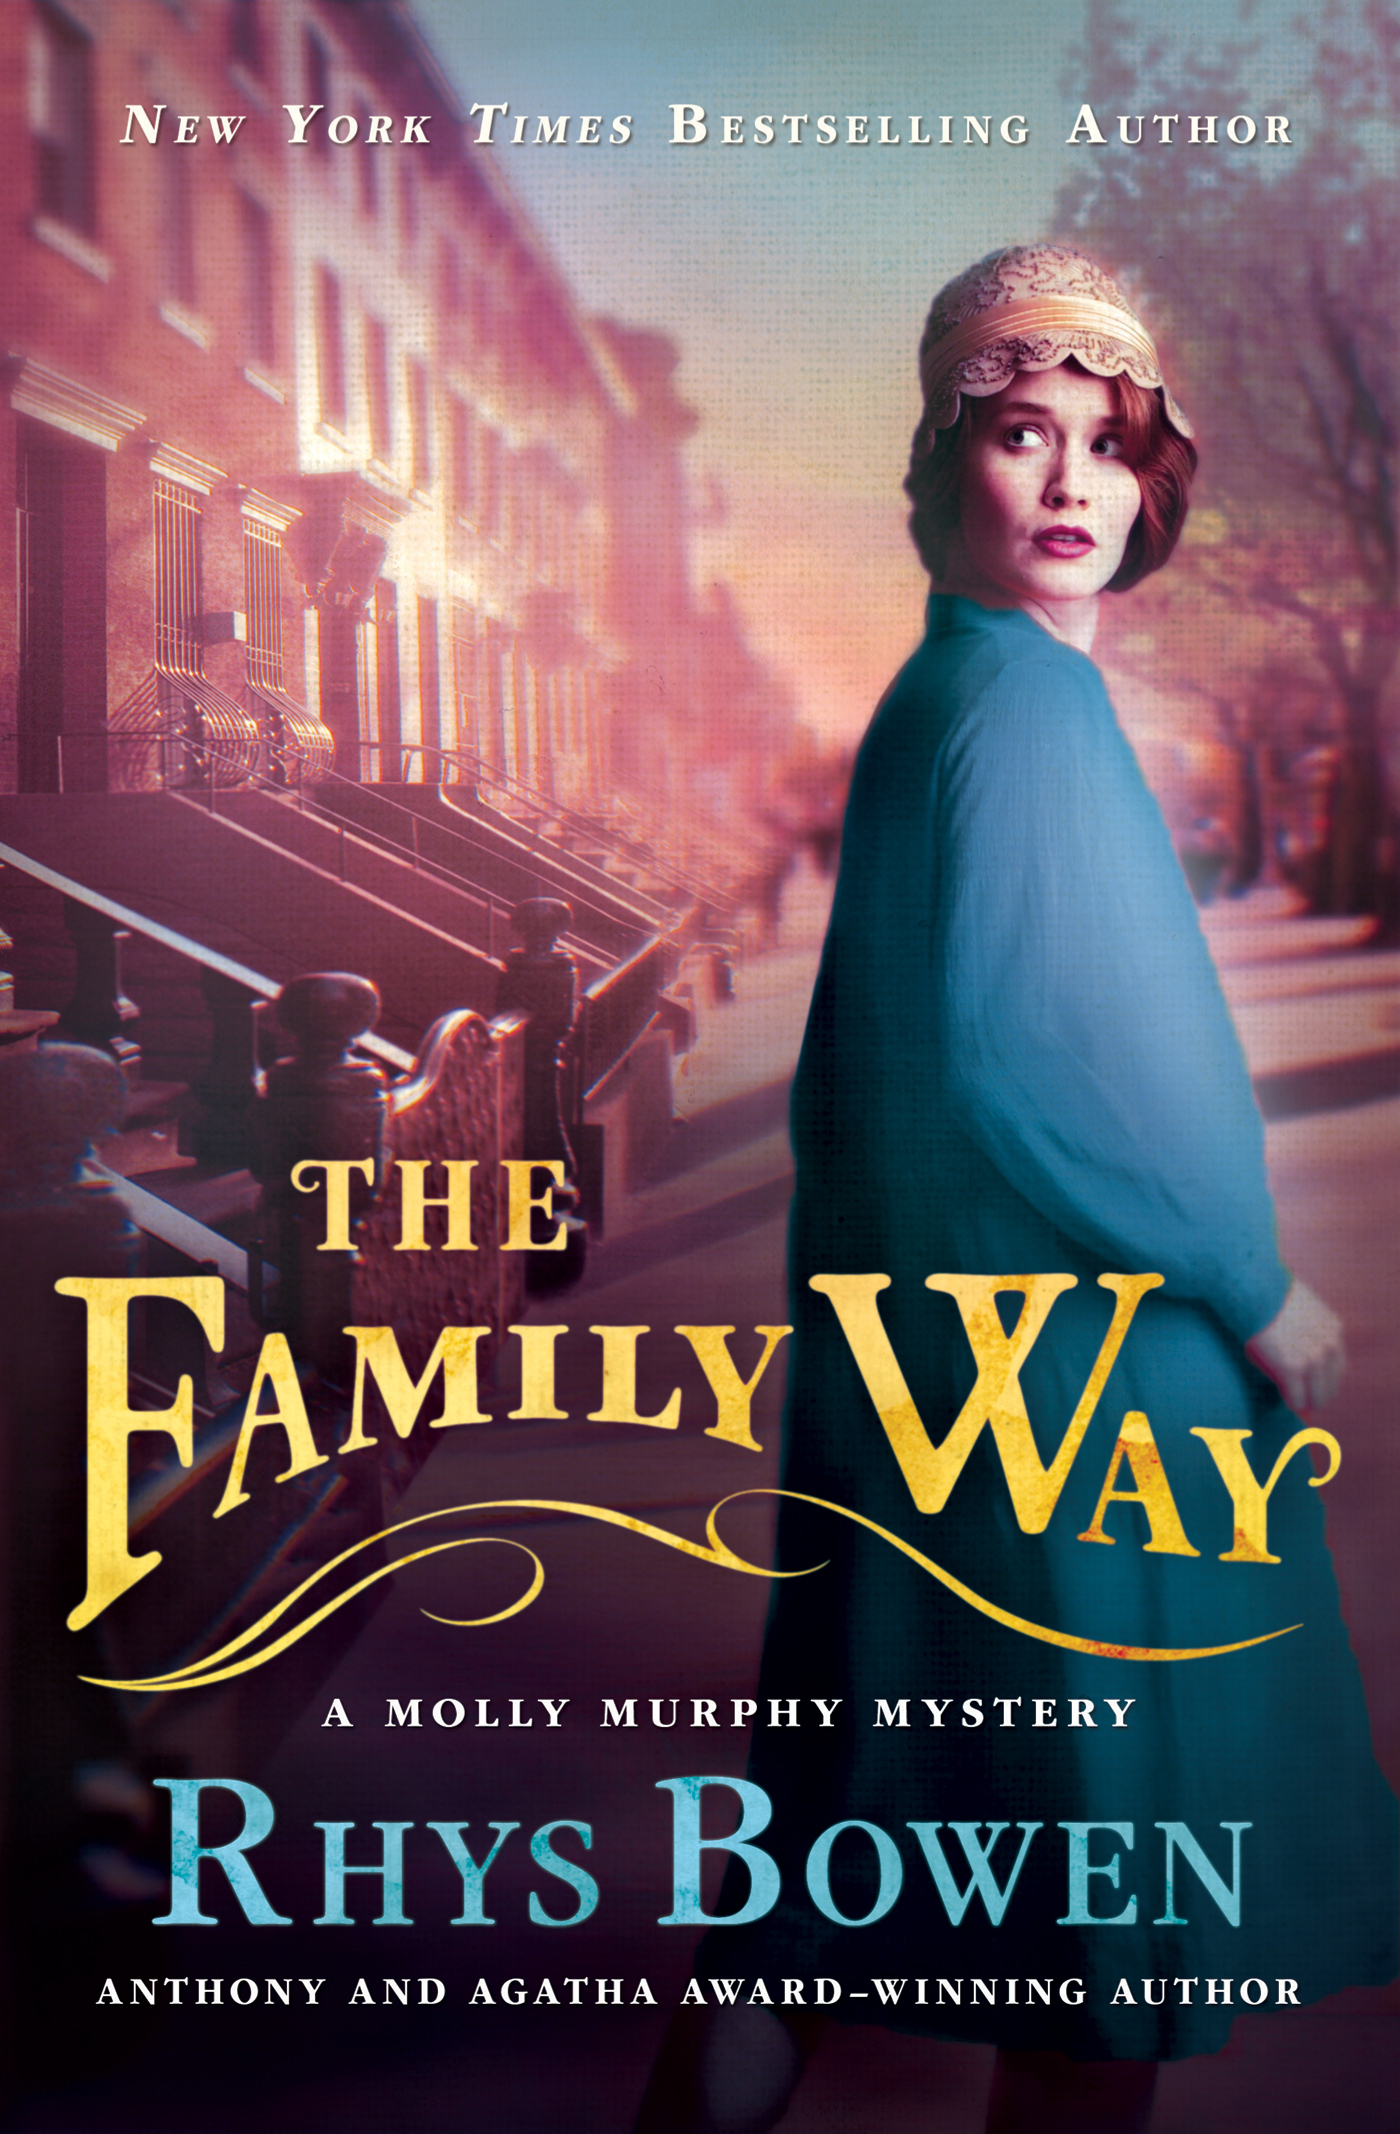 The family way cover image